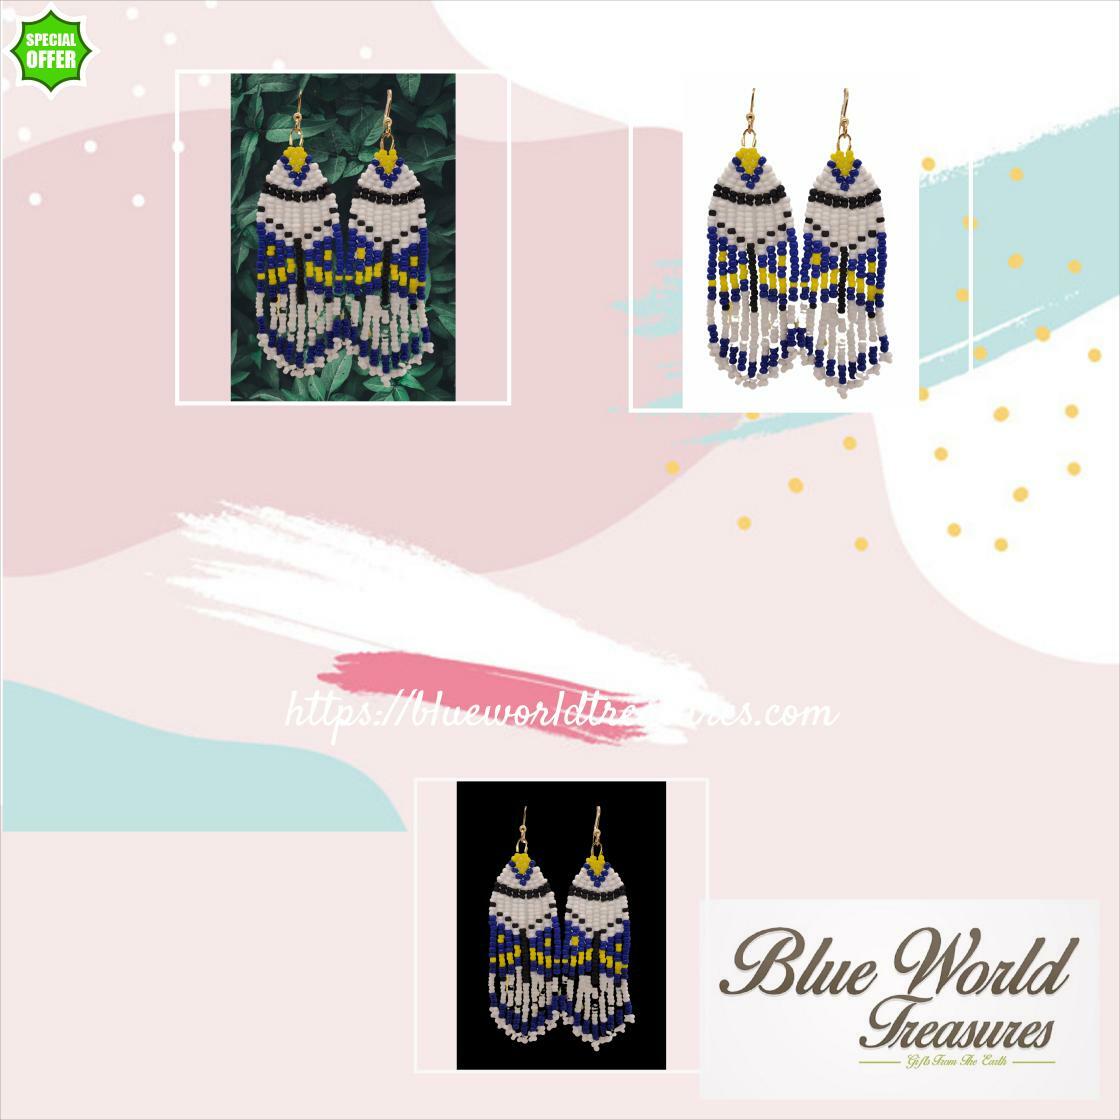 Hot Summer Looks! 🔥🔥🔥 Native American Summer Jewelry ~ Quirky Butterfly Seed Bead Fringe Earrings only $60.00!
Order Here 👉bit.ly/43ECCx7 👈 #BlueButterfly #BlueAndYellow